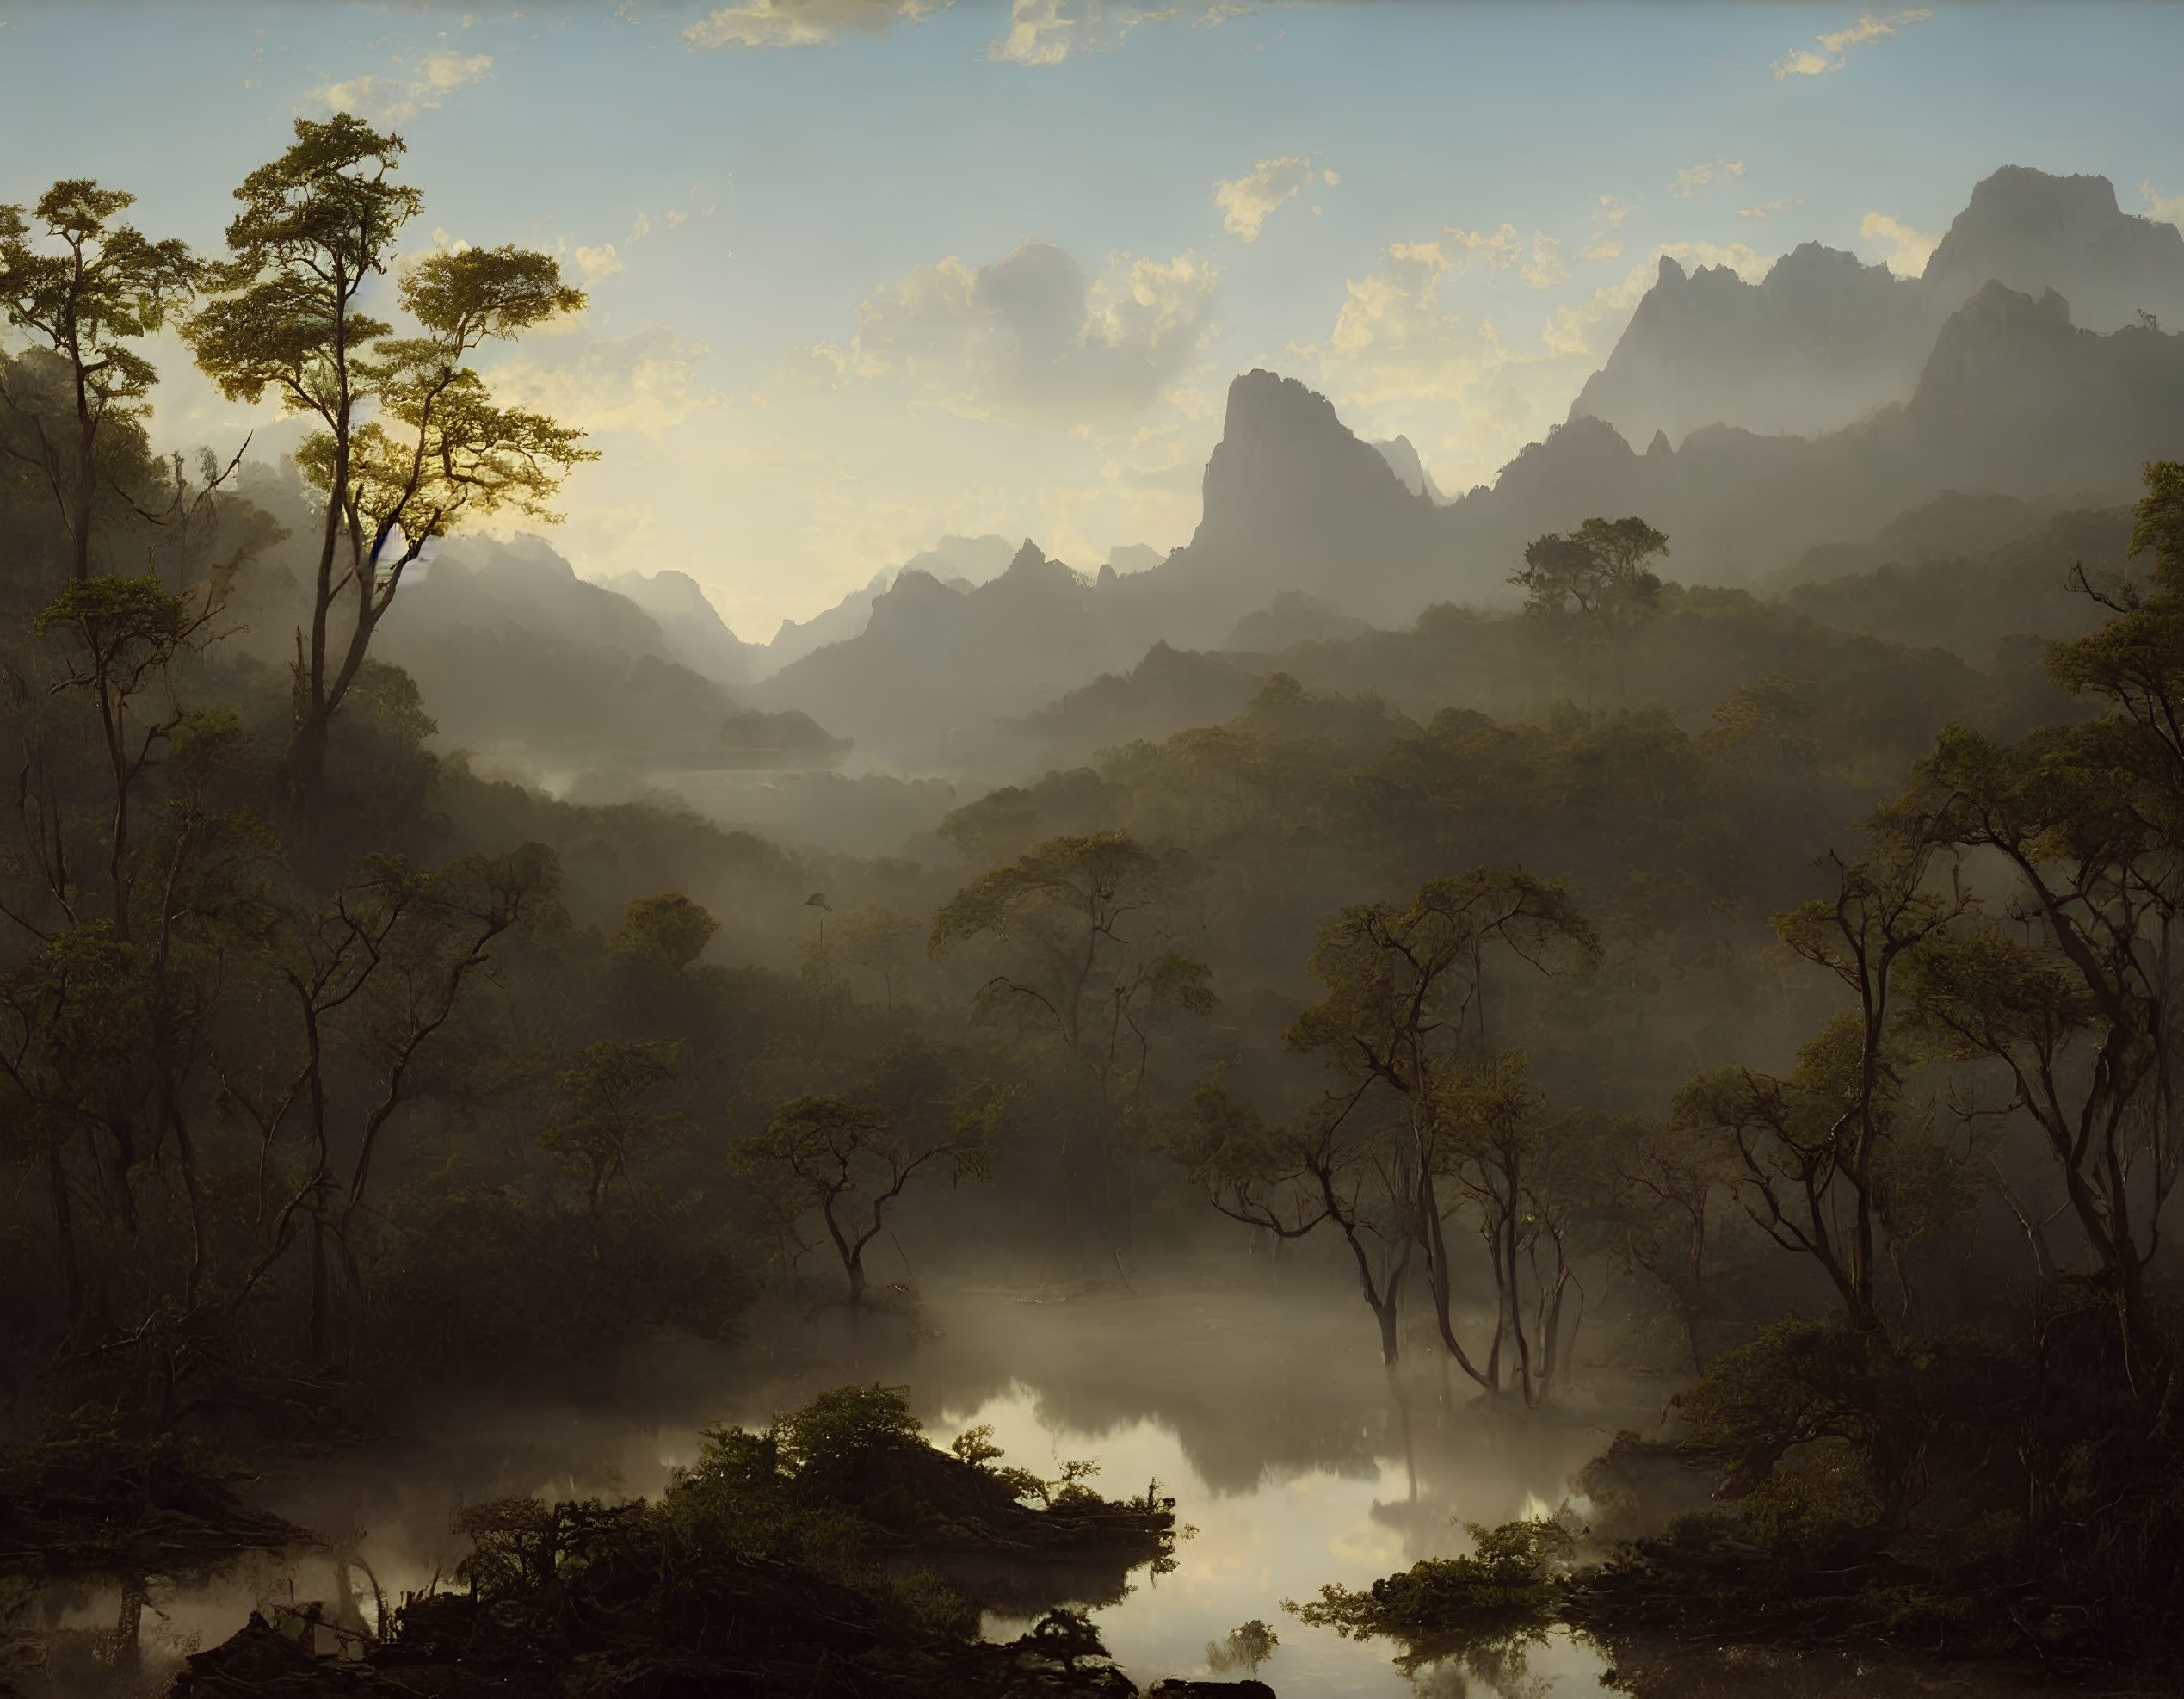 Misty River Landscape with Forests and Mountains